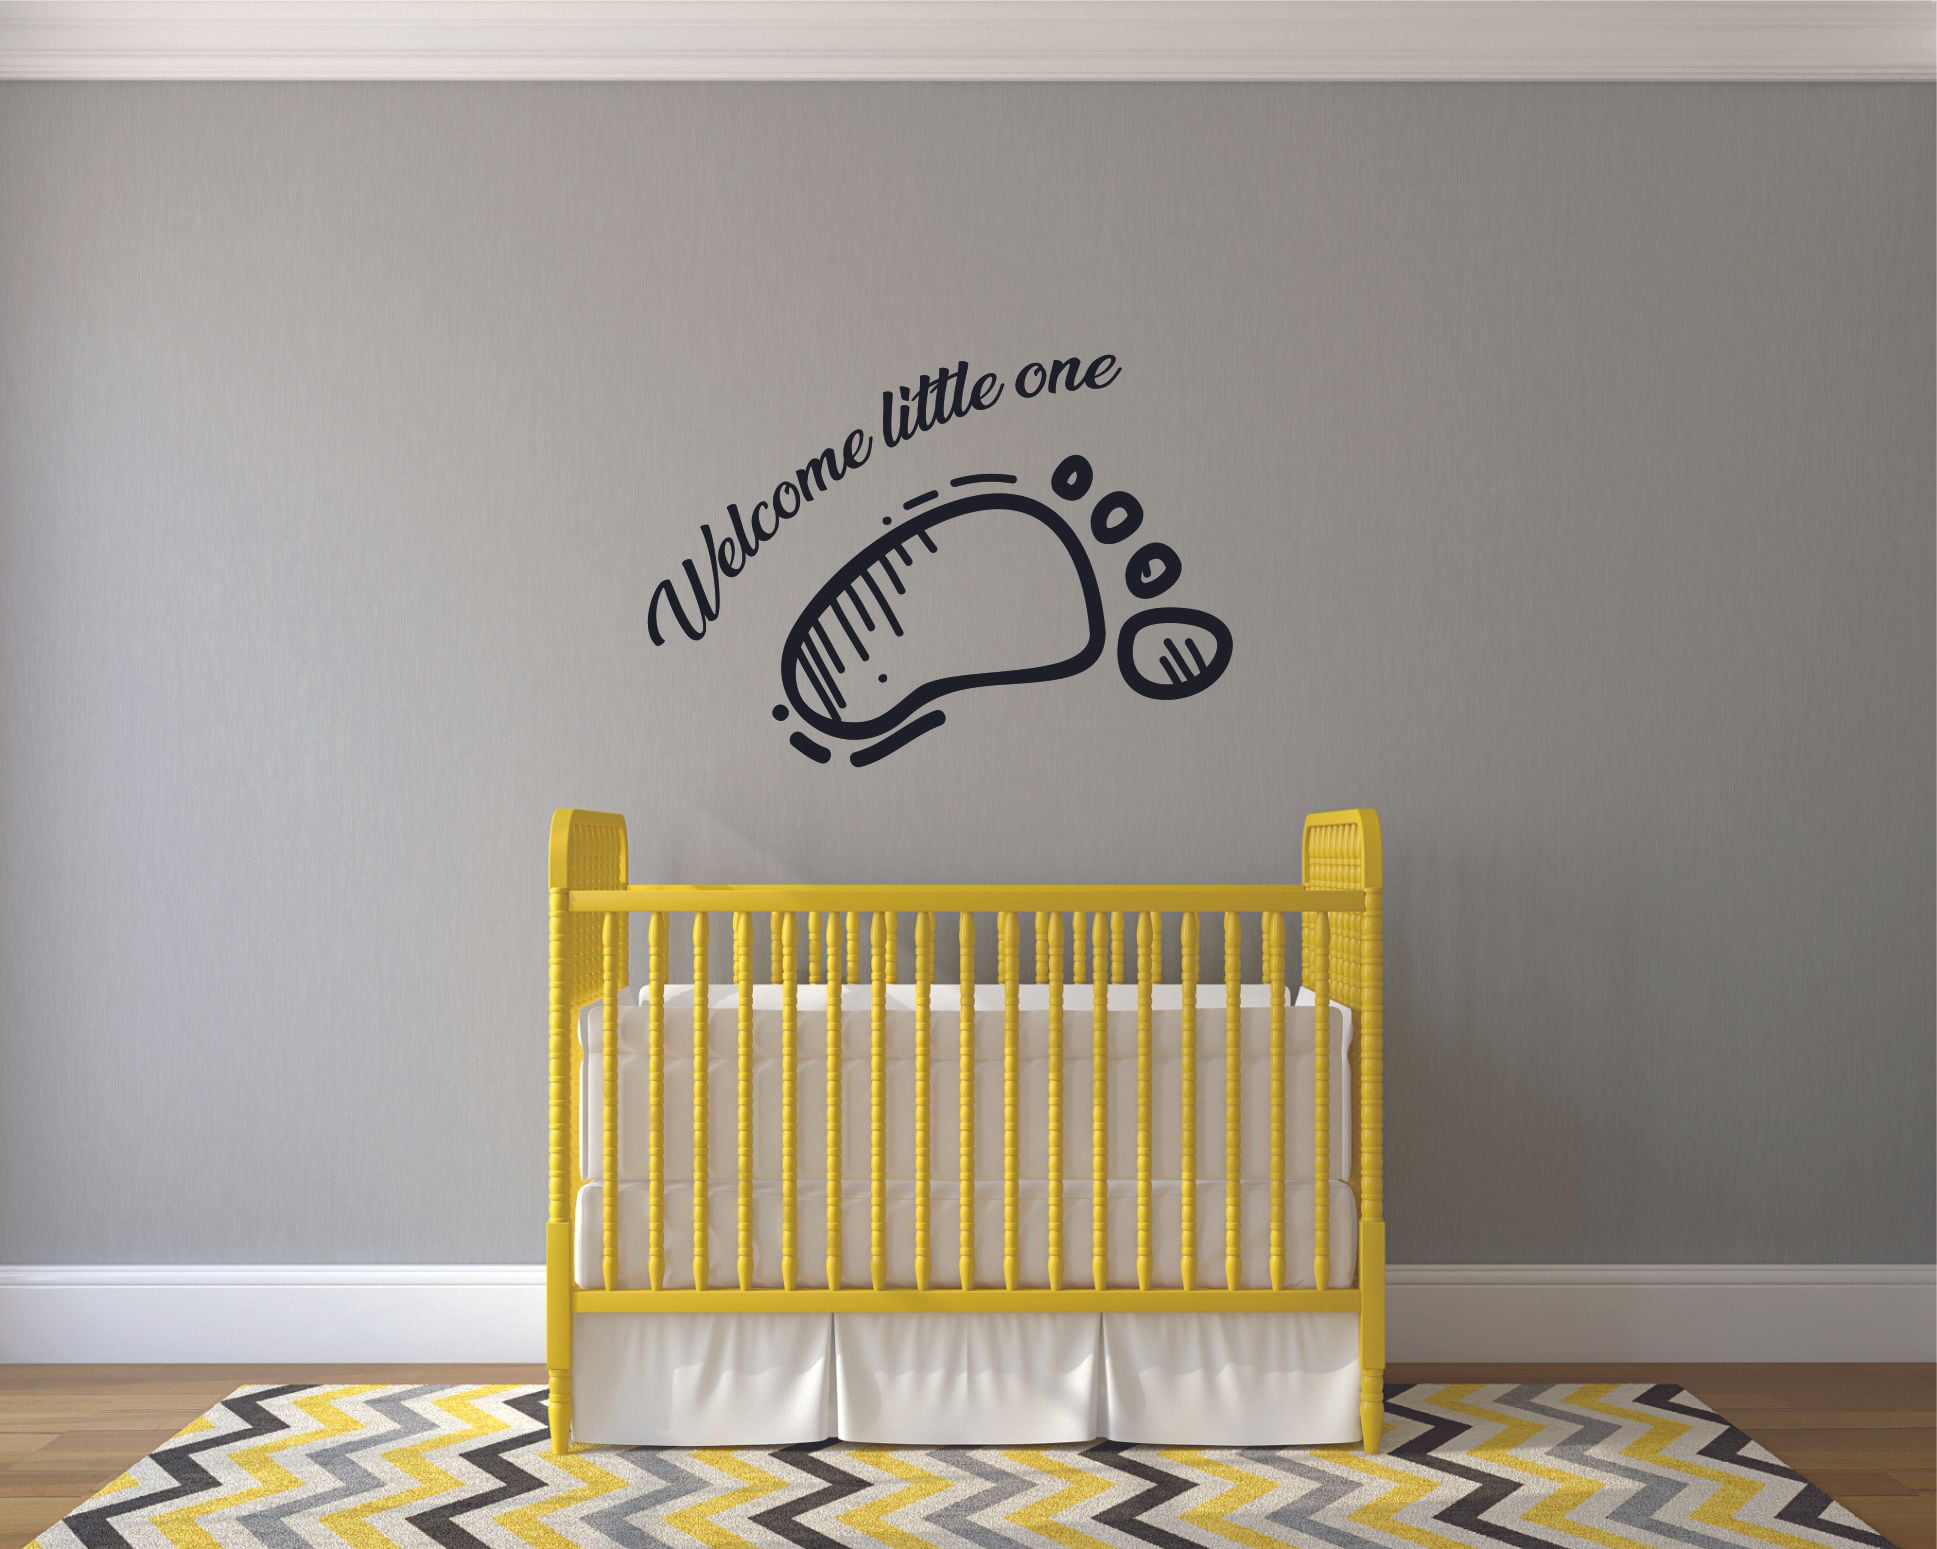 Details about   Dream Big Little One Quote Decor Wall Stickers Print  Poster